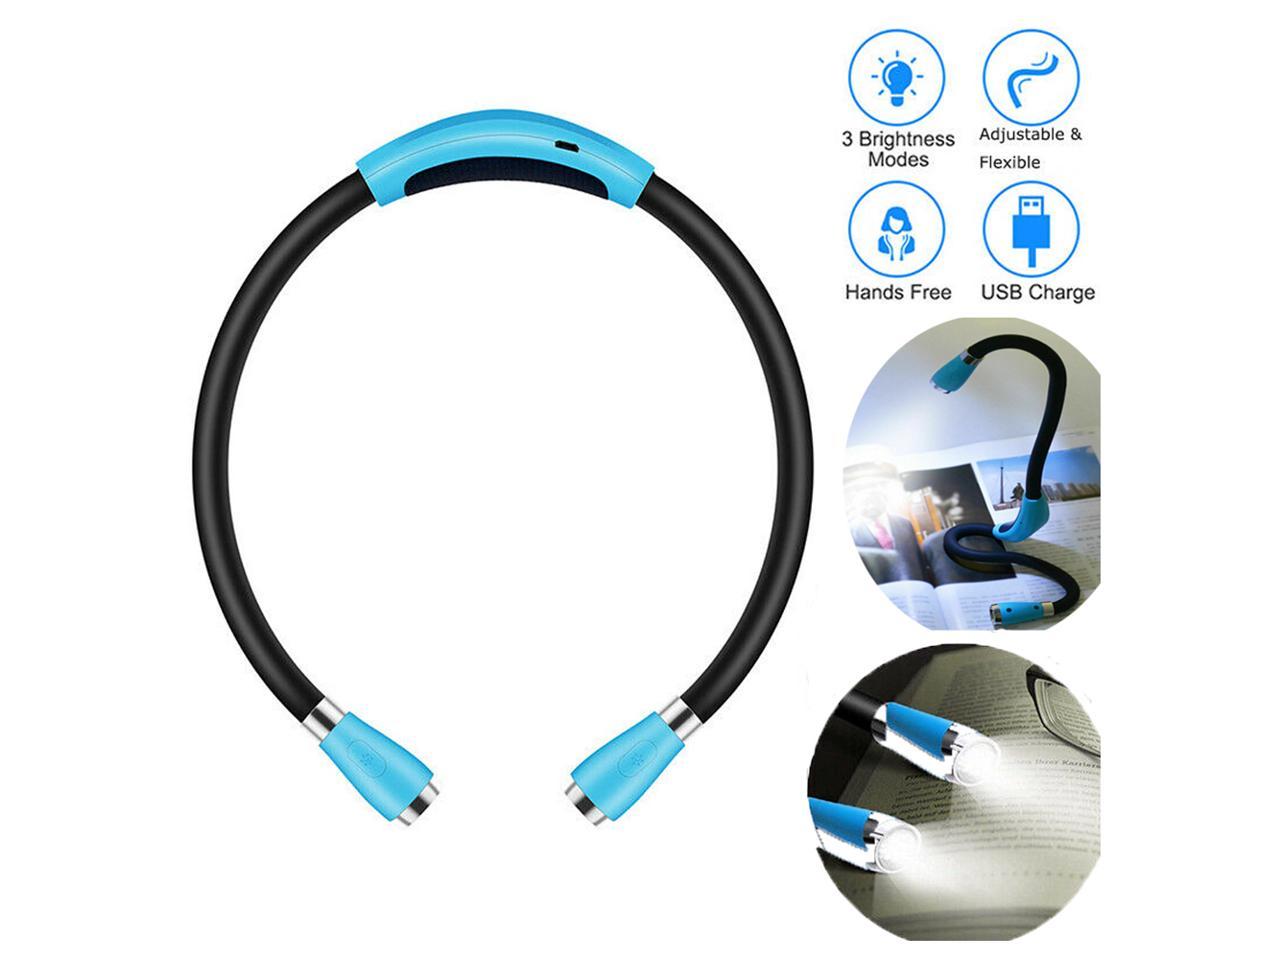 Flexible Arm Hands Free CeSunlight Rechargeable Neck LED Book Light Best for Bed Reading or Read in Car 4-Level Light Control 4 Super Bright LED Bulbs 